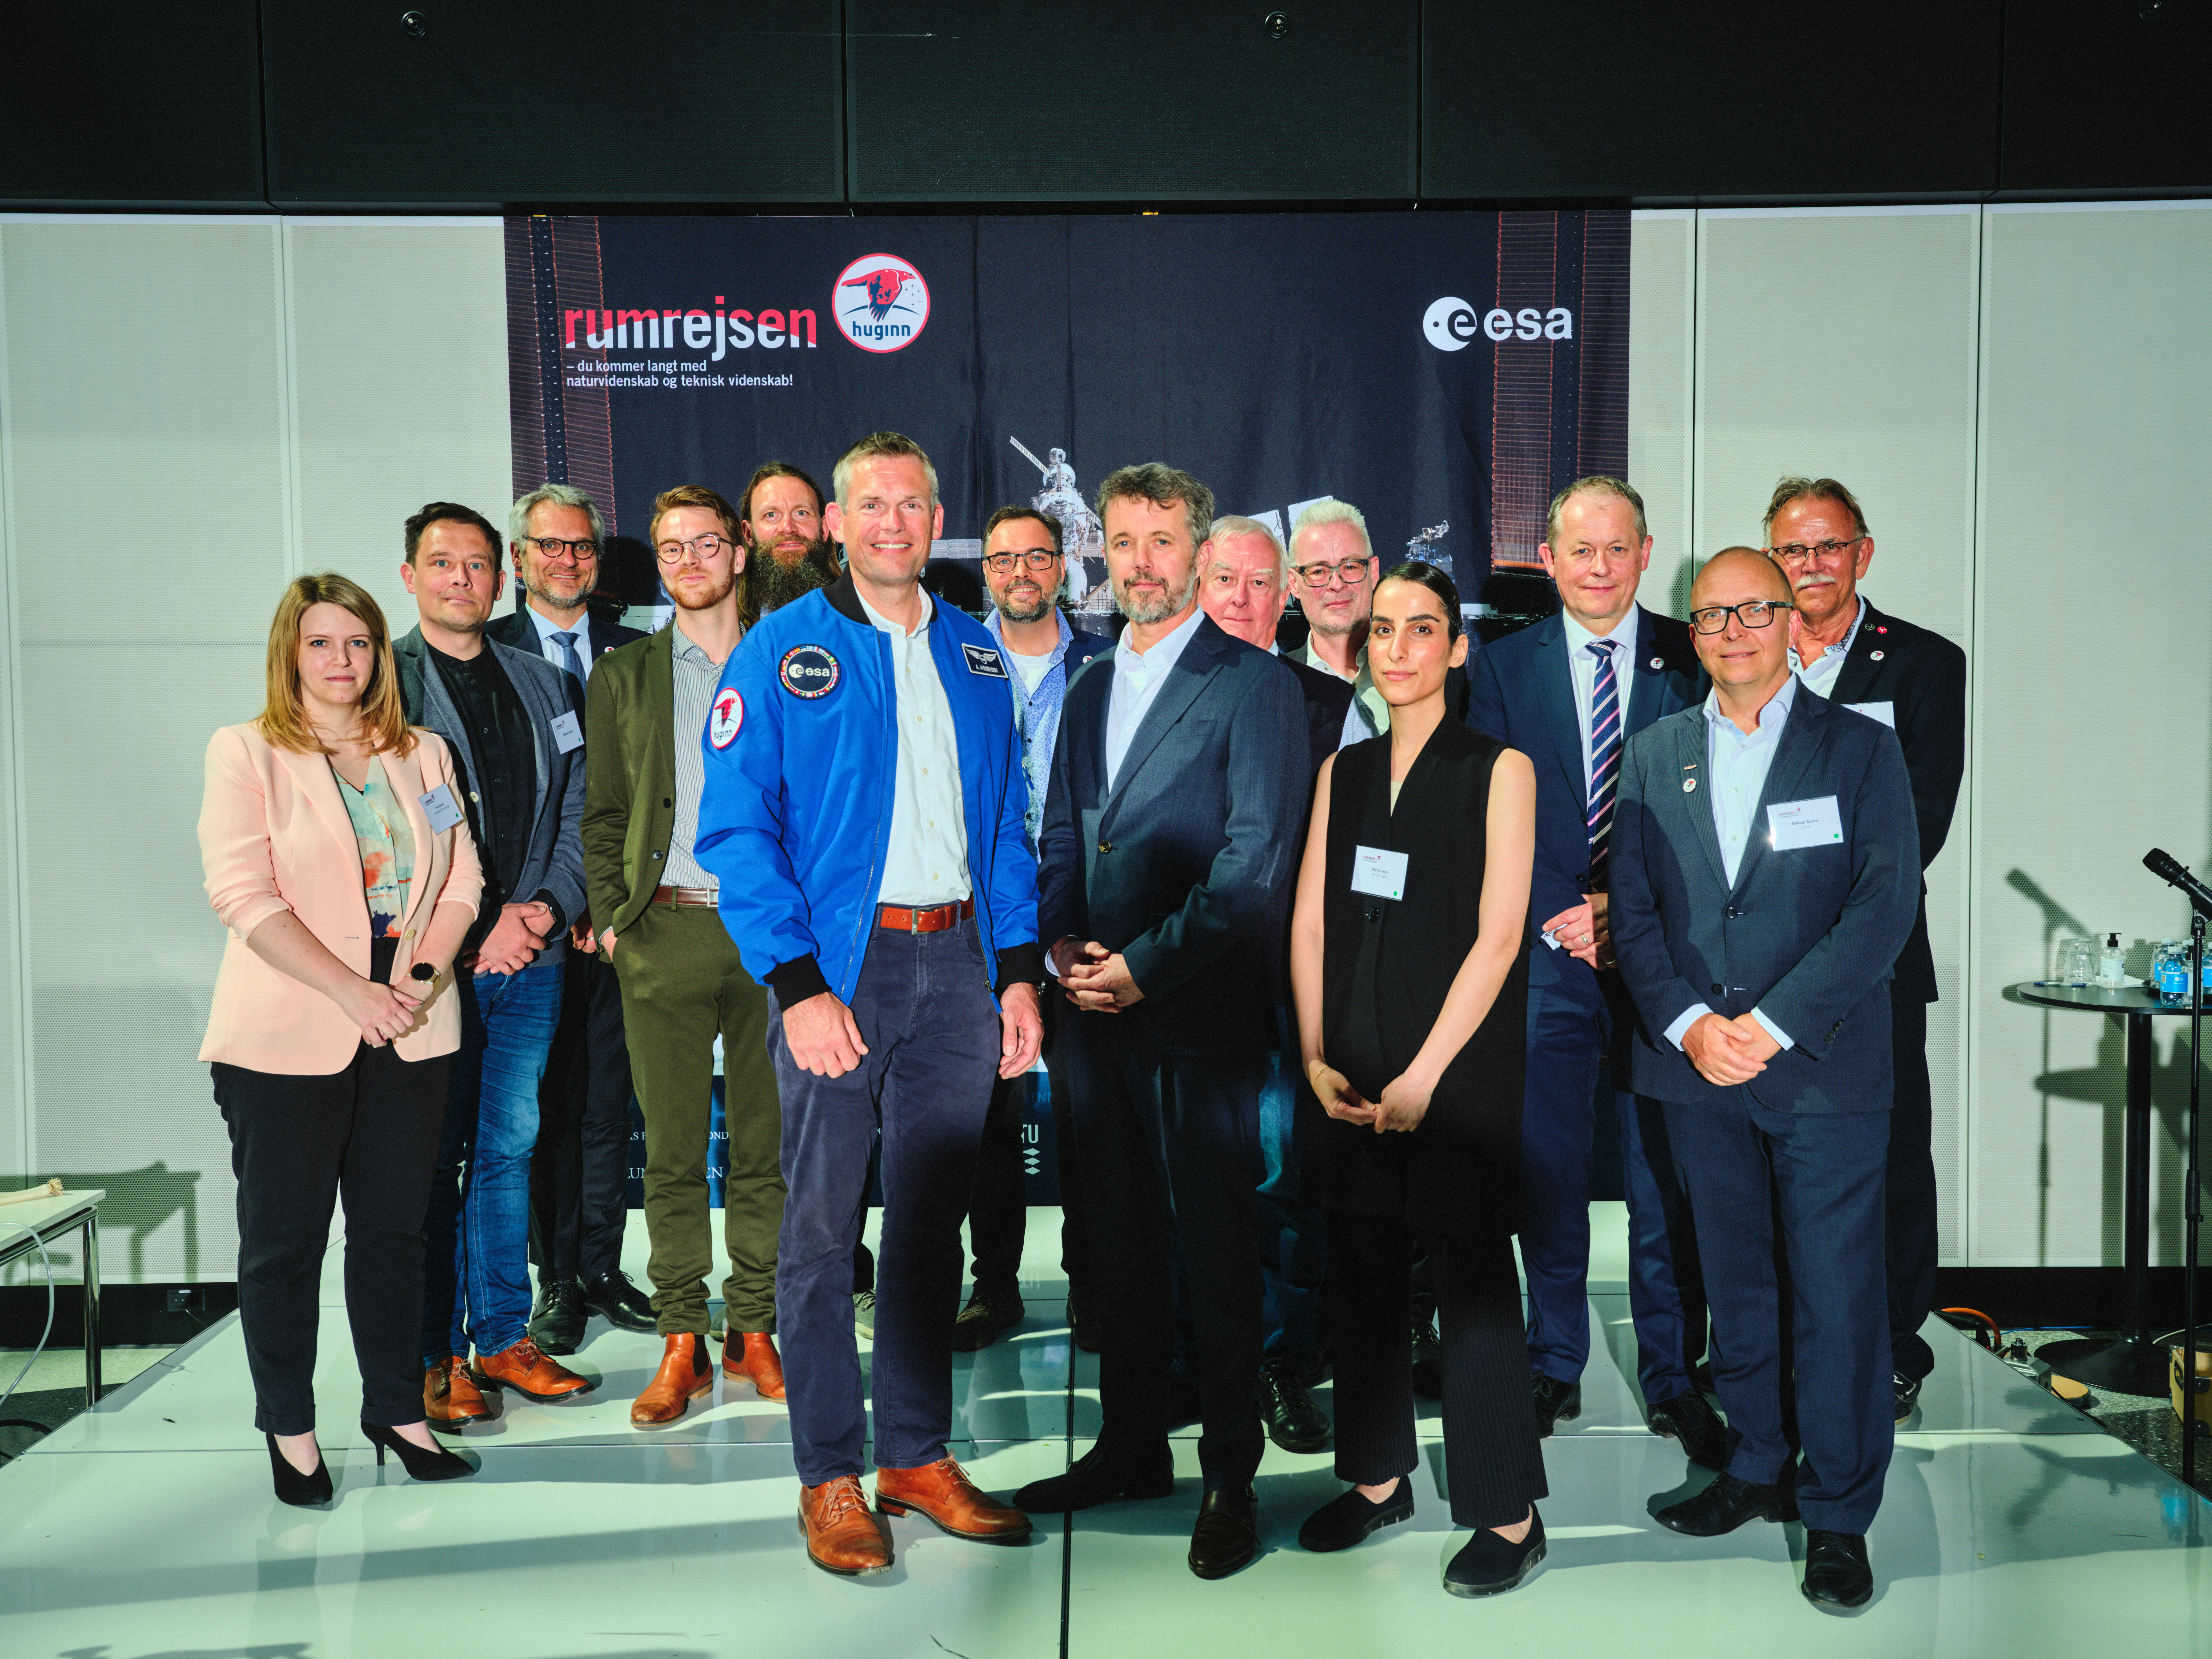 The Huginn-ambassadors present at the meeting on 22. May 2023 with HRH Crown Prince Frederik and ESA-astronaut Andreas Mogensen in front. Photo: DI